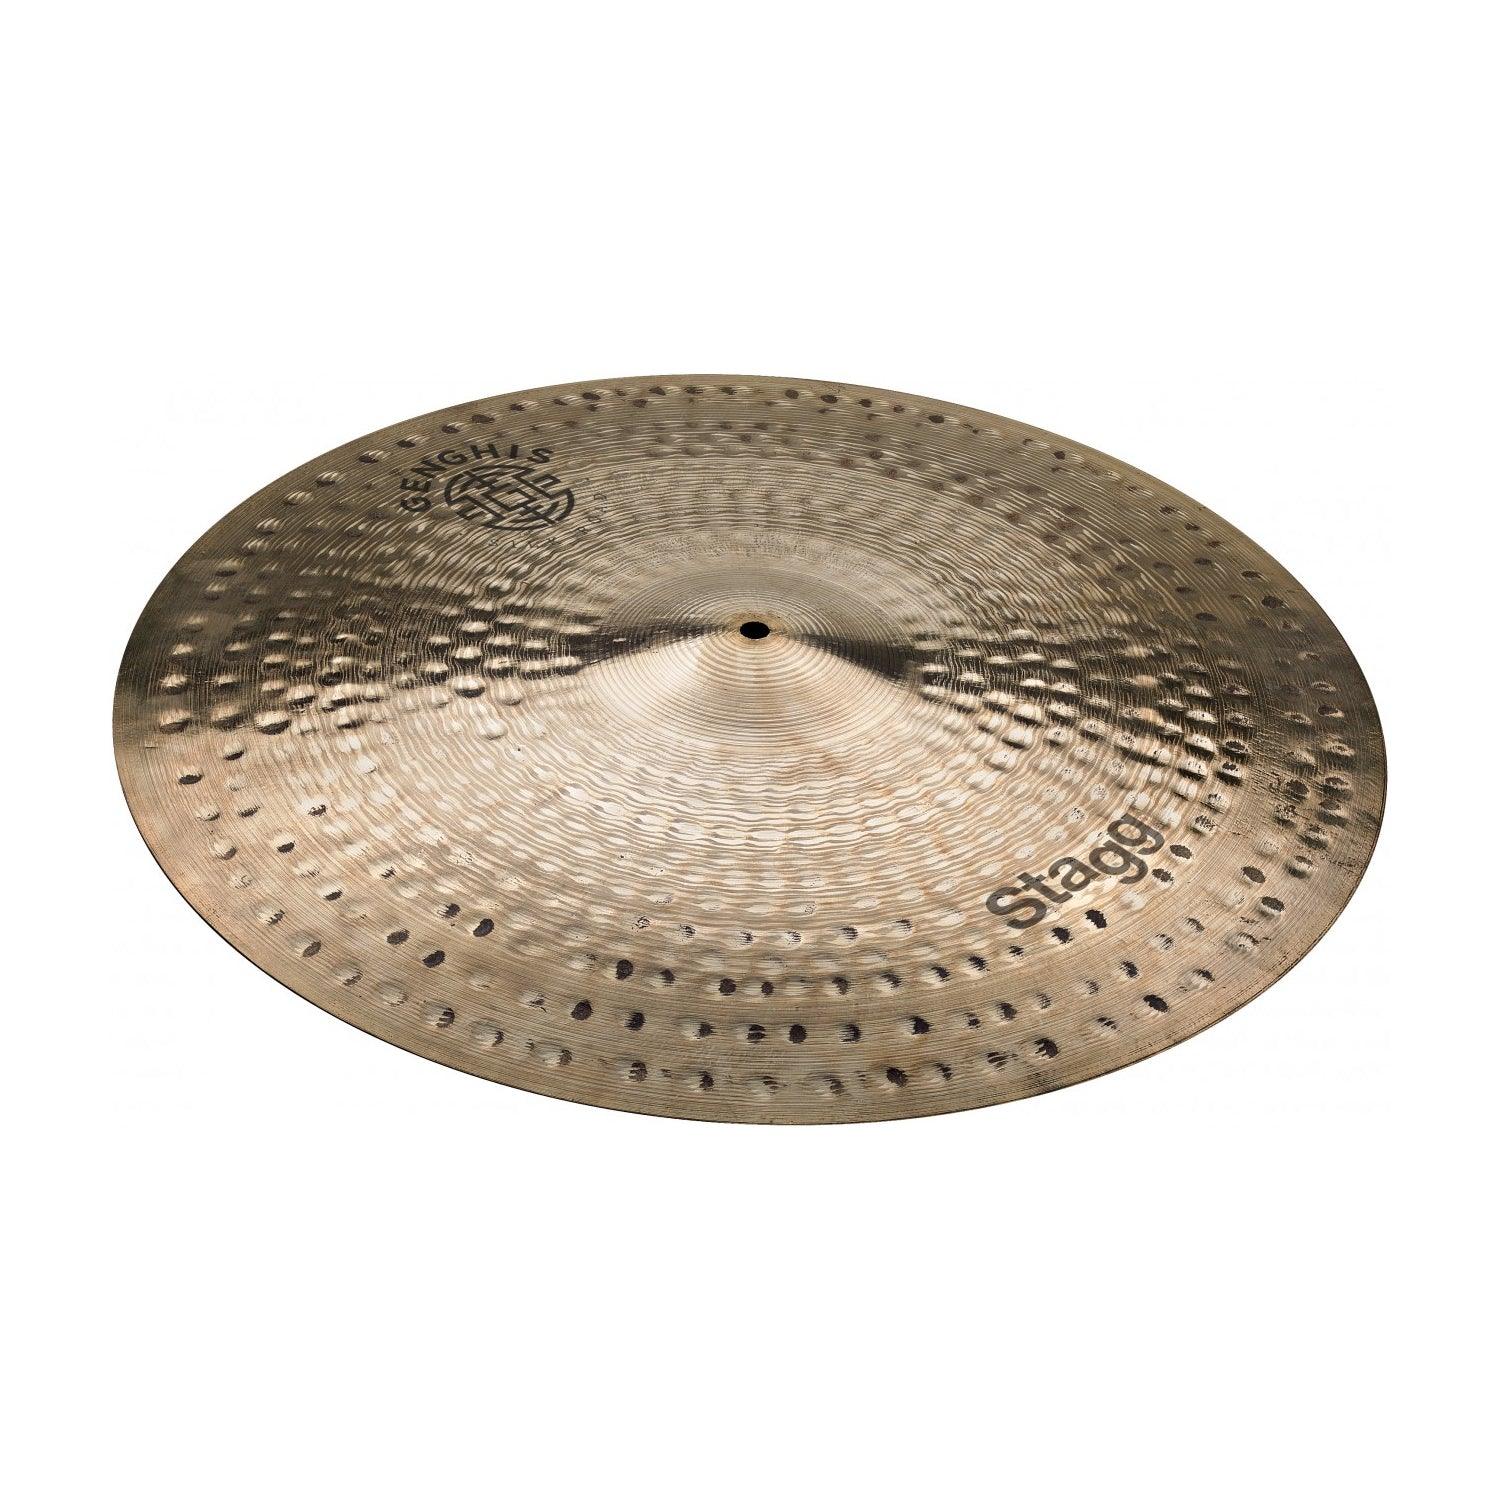 Stagg GENG-RM21R 21" Genghis medium ride Cymbal - DY Pro Audio